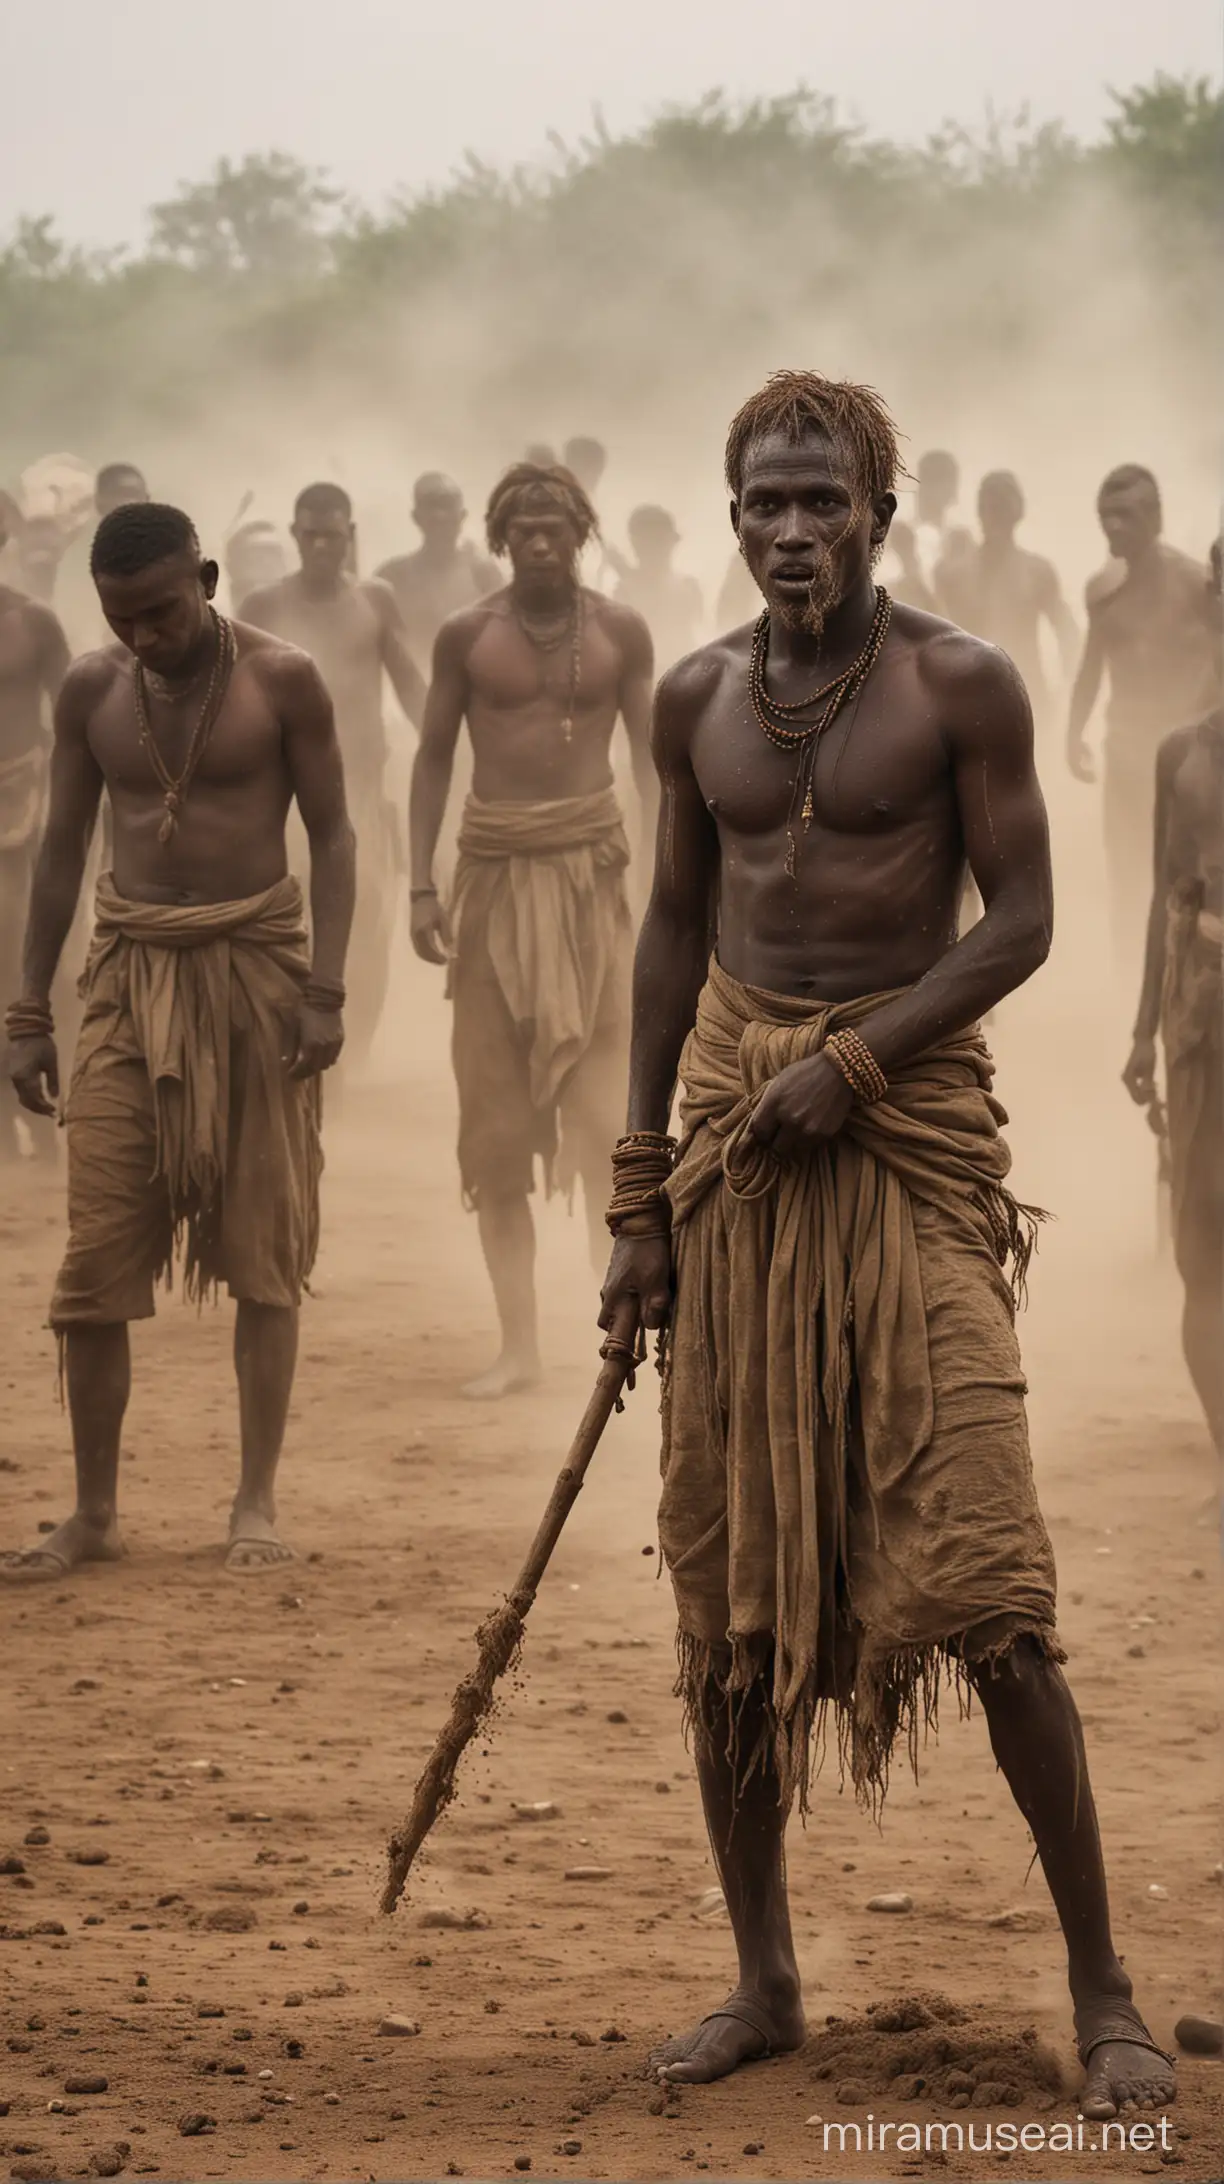 An intense moment of Surma men's ritual combat in their quest for finding a spouse, depicting a scene filled with dust and energy.
